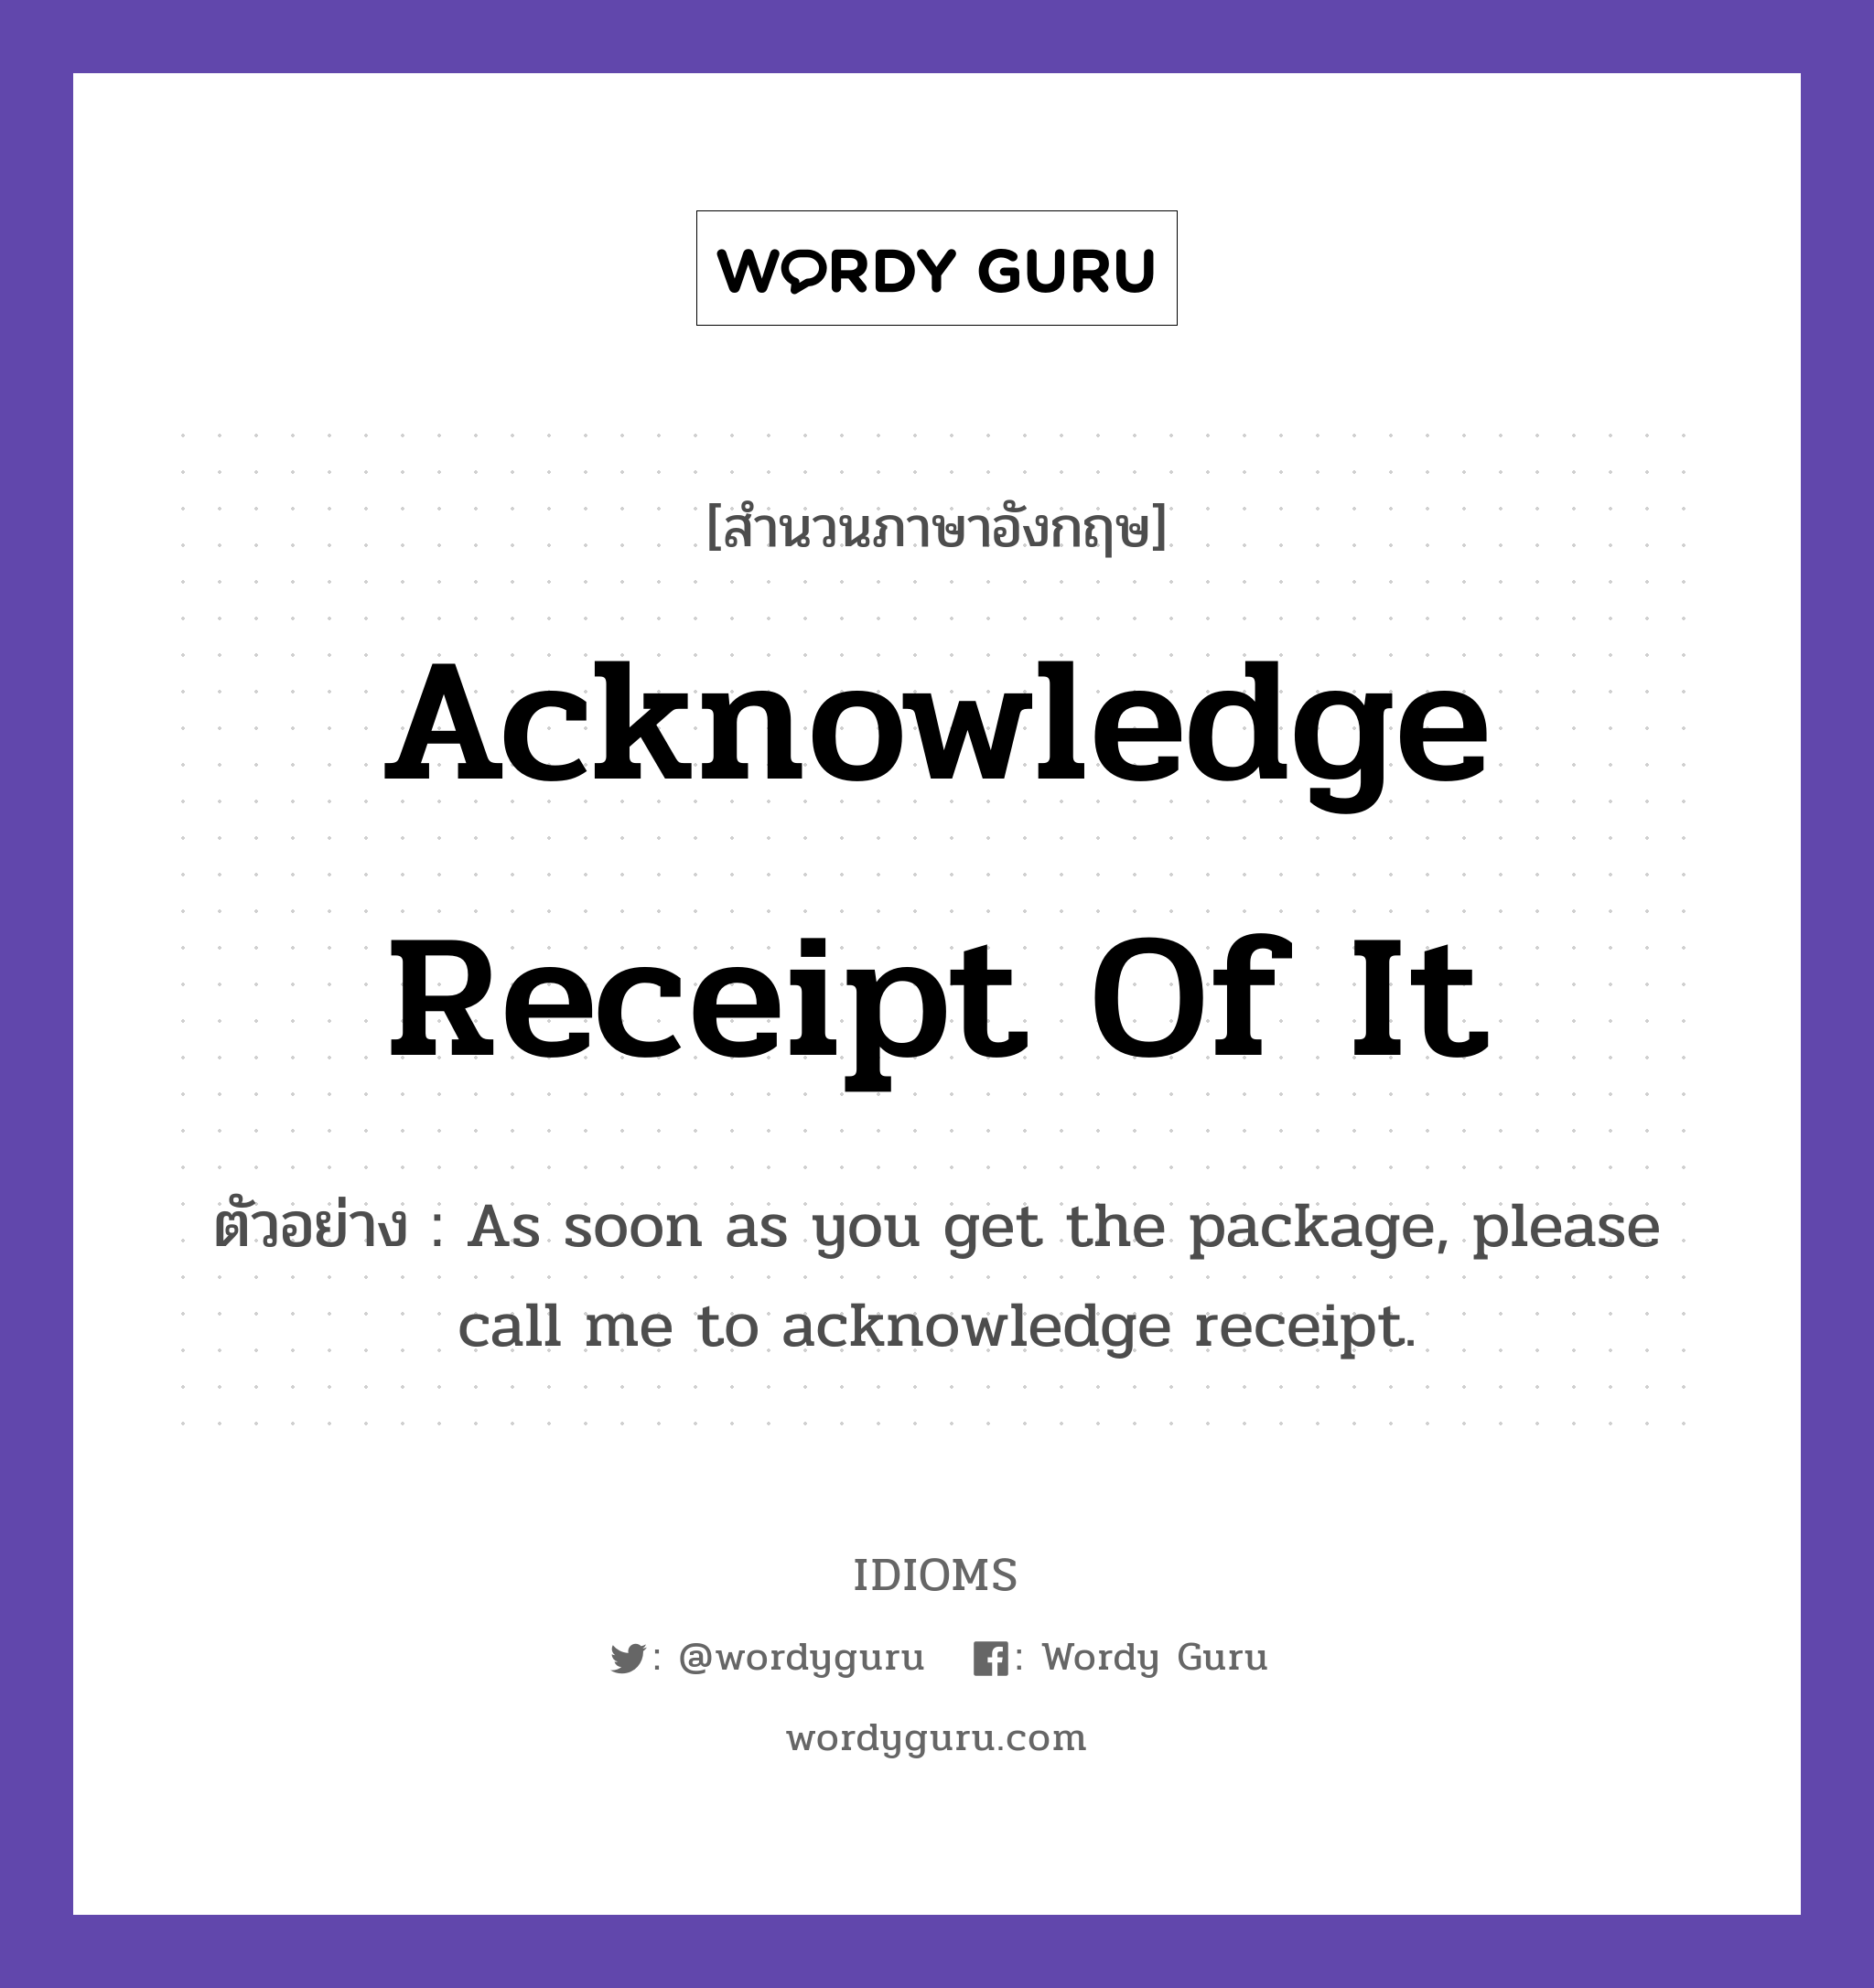 Acknowledge Receipt Of It แปลว่า?, สำนวนภาษาอังกฤษ Acknowledge Receipt Of It ตัวอย่าง As soon as you get the package, please call me to acknowledge receipt.